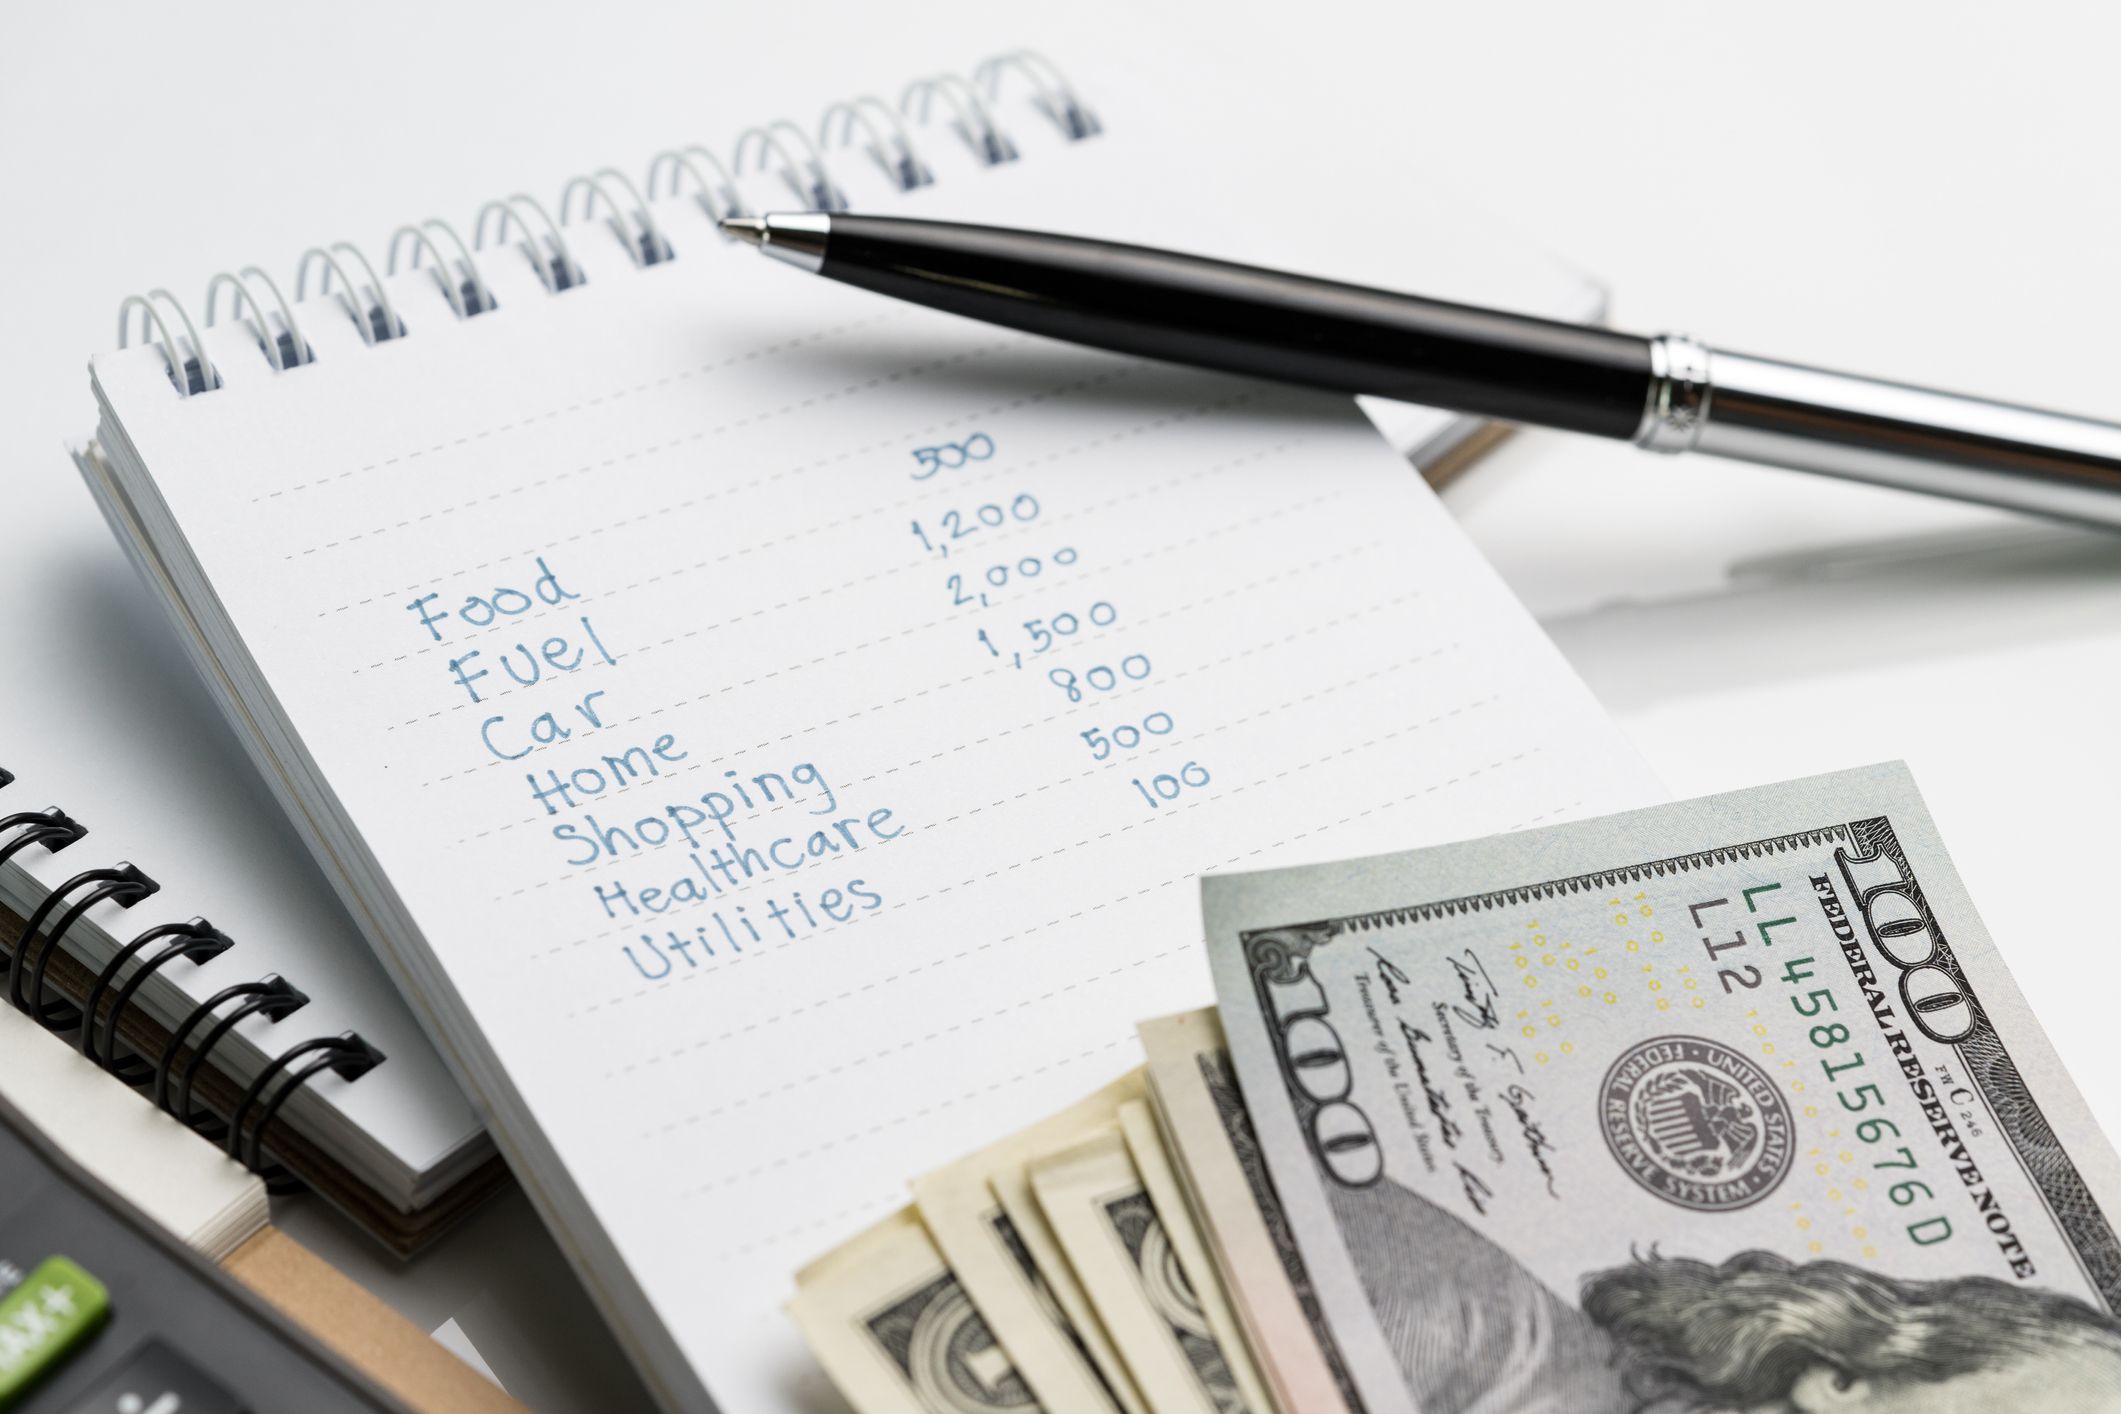 <p>This should include everything from big expenses, such as your mortgage or rent payment, to your “fun” money for eating out or spur-of-the-moment purchases.</p><p>Make note of your fixed expenses and your variable expenses. Your fixed expenses will stay static month over month, such as your cable bill, mortgage payment and any other <a href="https://www.magnifymoney.com/compare/personal-loans/">fixed-rate installment loan</a> payments you may have. Your variable expenses are a bit harder to estimate, and include purchases like groceries, clothing and utility bills.</p><h2>  <b>Fixed expenses</b> </h2><p>A list of common monthly expenses:</p><p>Mortgage or rent payent</p><p>Auto loan payment and insurance</p><p>Student loan payment</p><p>Internet, cable and streaming subscriptions</p><p>Health insurance premiums</p><p>Gym memberships</p><p>Cellphone bill</p><h2>Variable expenses</h2><p>Groceries</p><p>Utilities, including electric and water</p><p>Out-of-pocket medical expenses</p><p>Transportation costs (gas, train tickets)</p><p>Discretionary expenses (clothing, home goods)</p><p>Entertainment</p><p>Gifts</p><p>Budgeting apps help you track your expenses</p><p>Smartphone technology has made it easier than ever to create a budget and track your expenses. You can download many <a href="https://www.magnifymoney.com/compare/budget-apps/">budget apps</a> for free, although some offer premium features for a cost. </p>